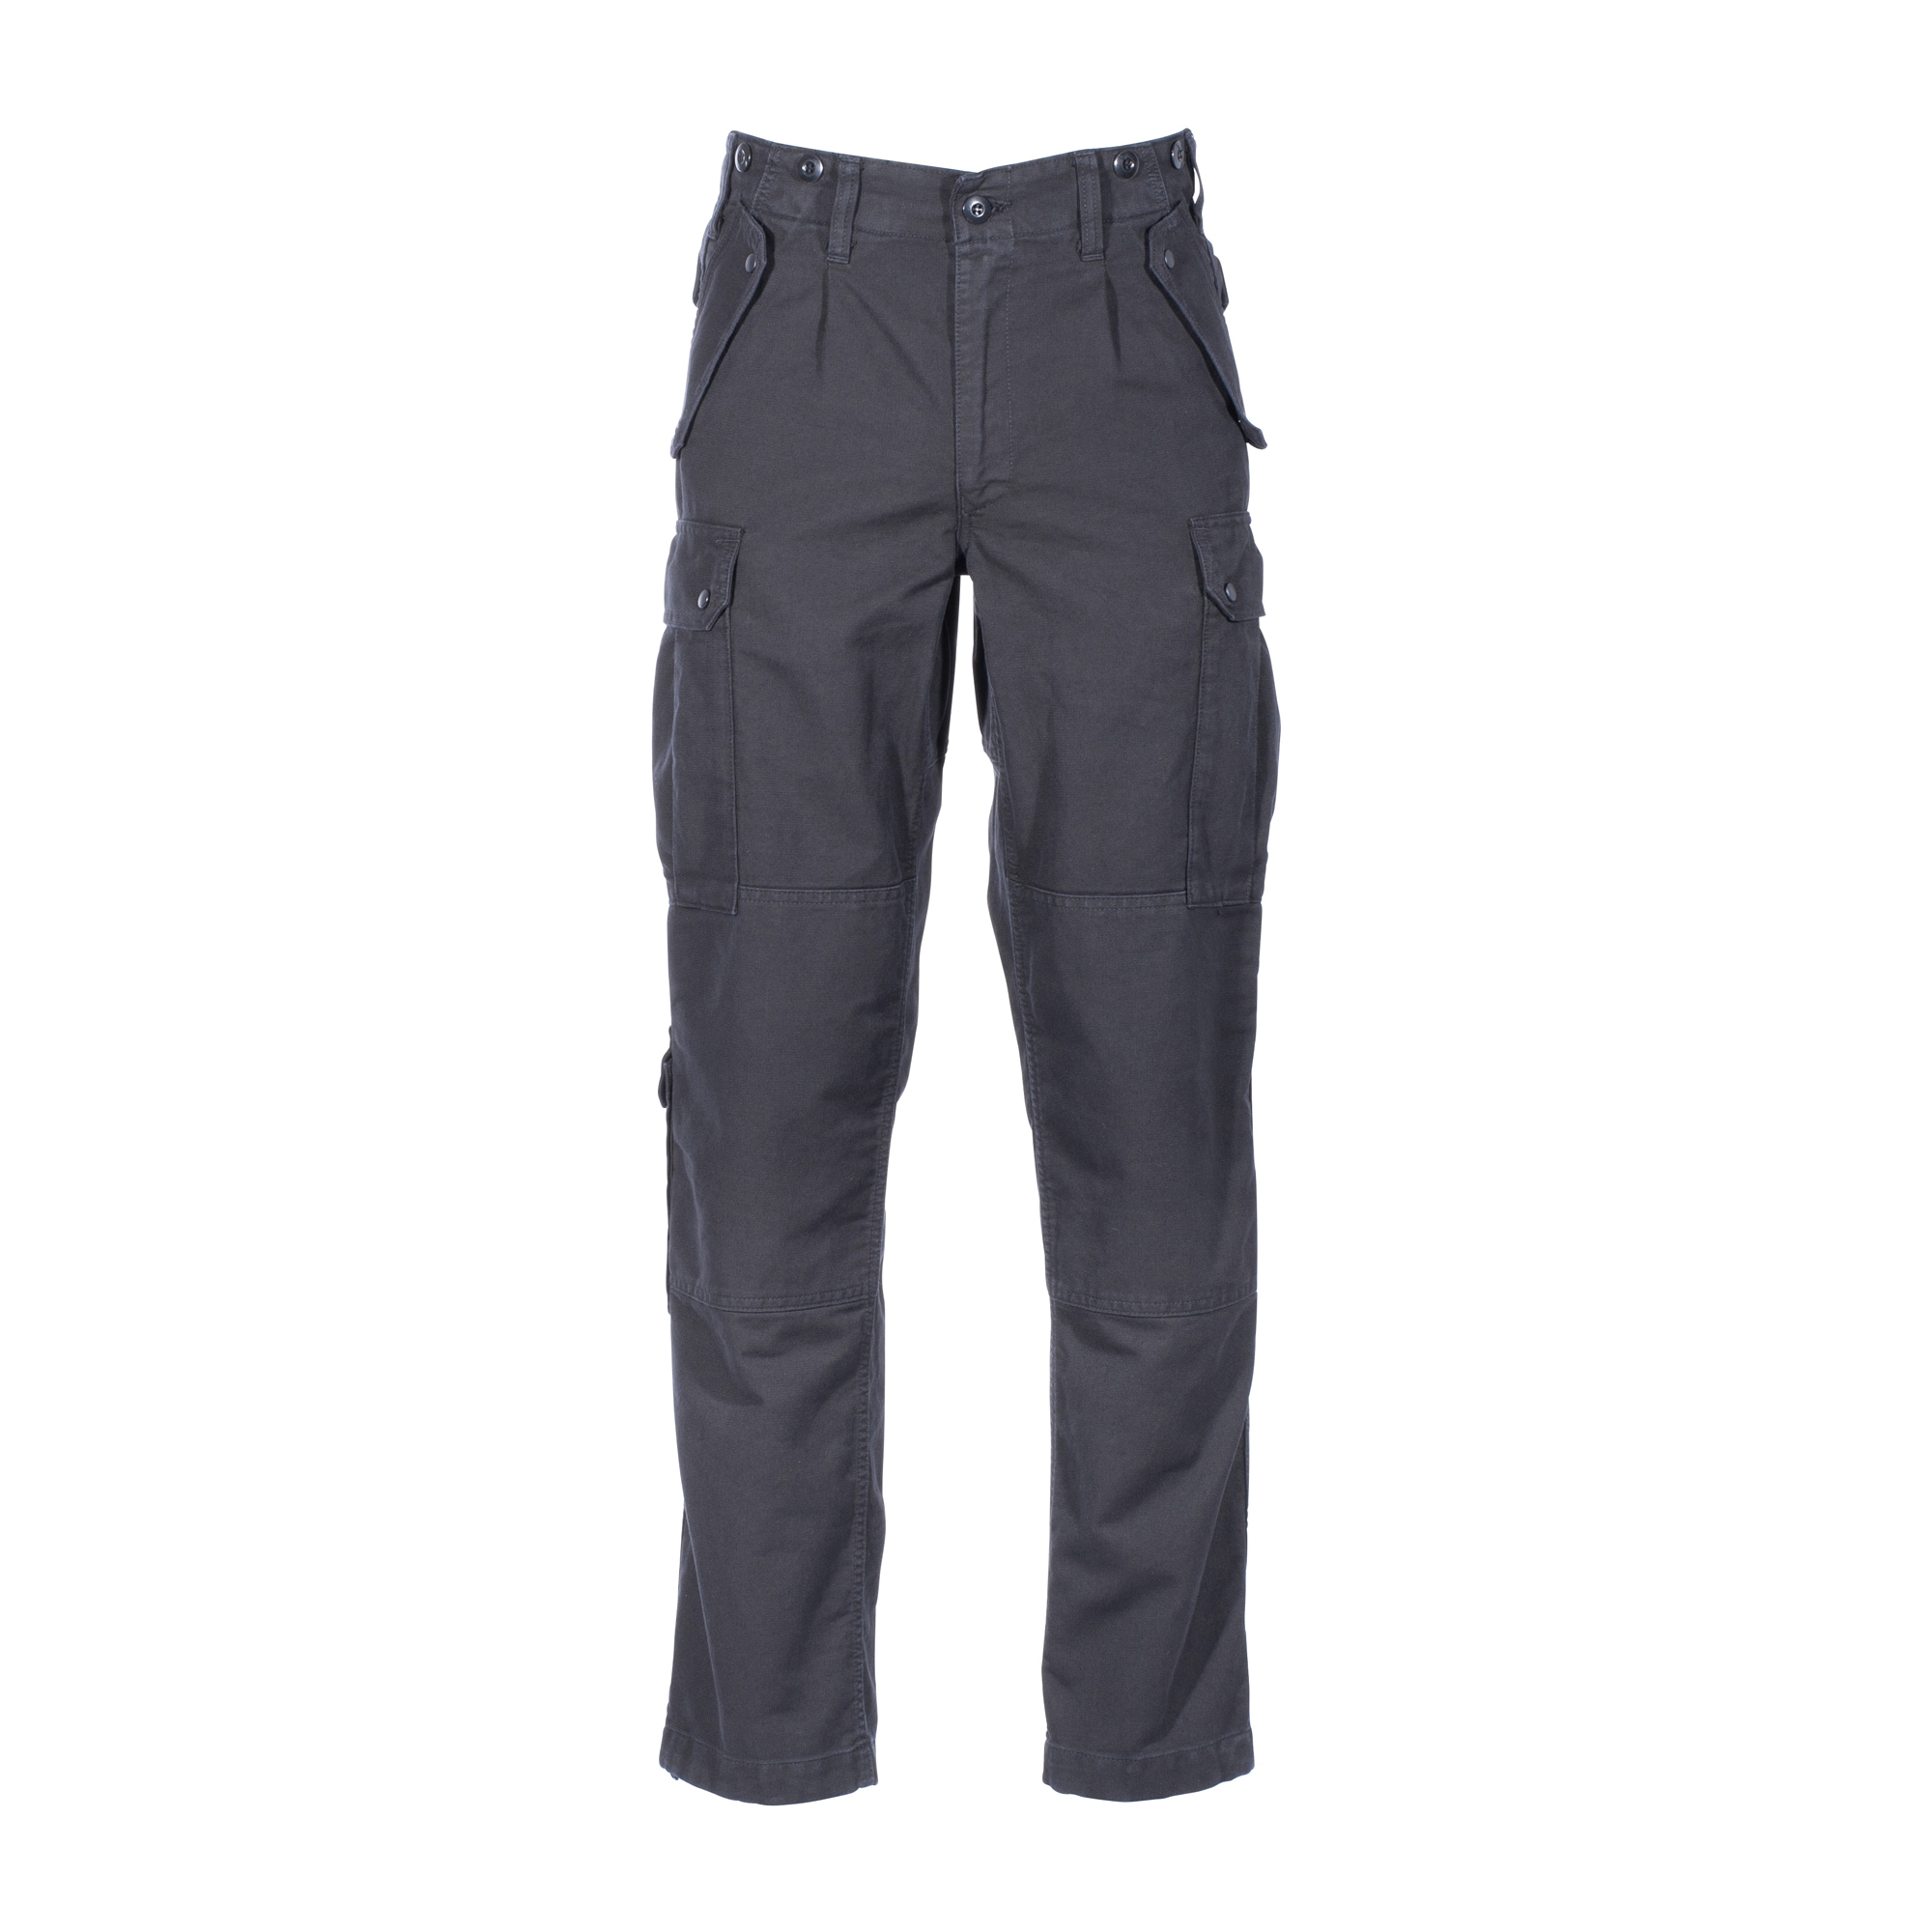 Purchase the Commando Field Pants M-65 black by ASMC